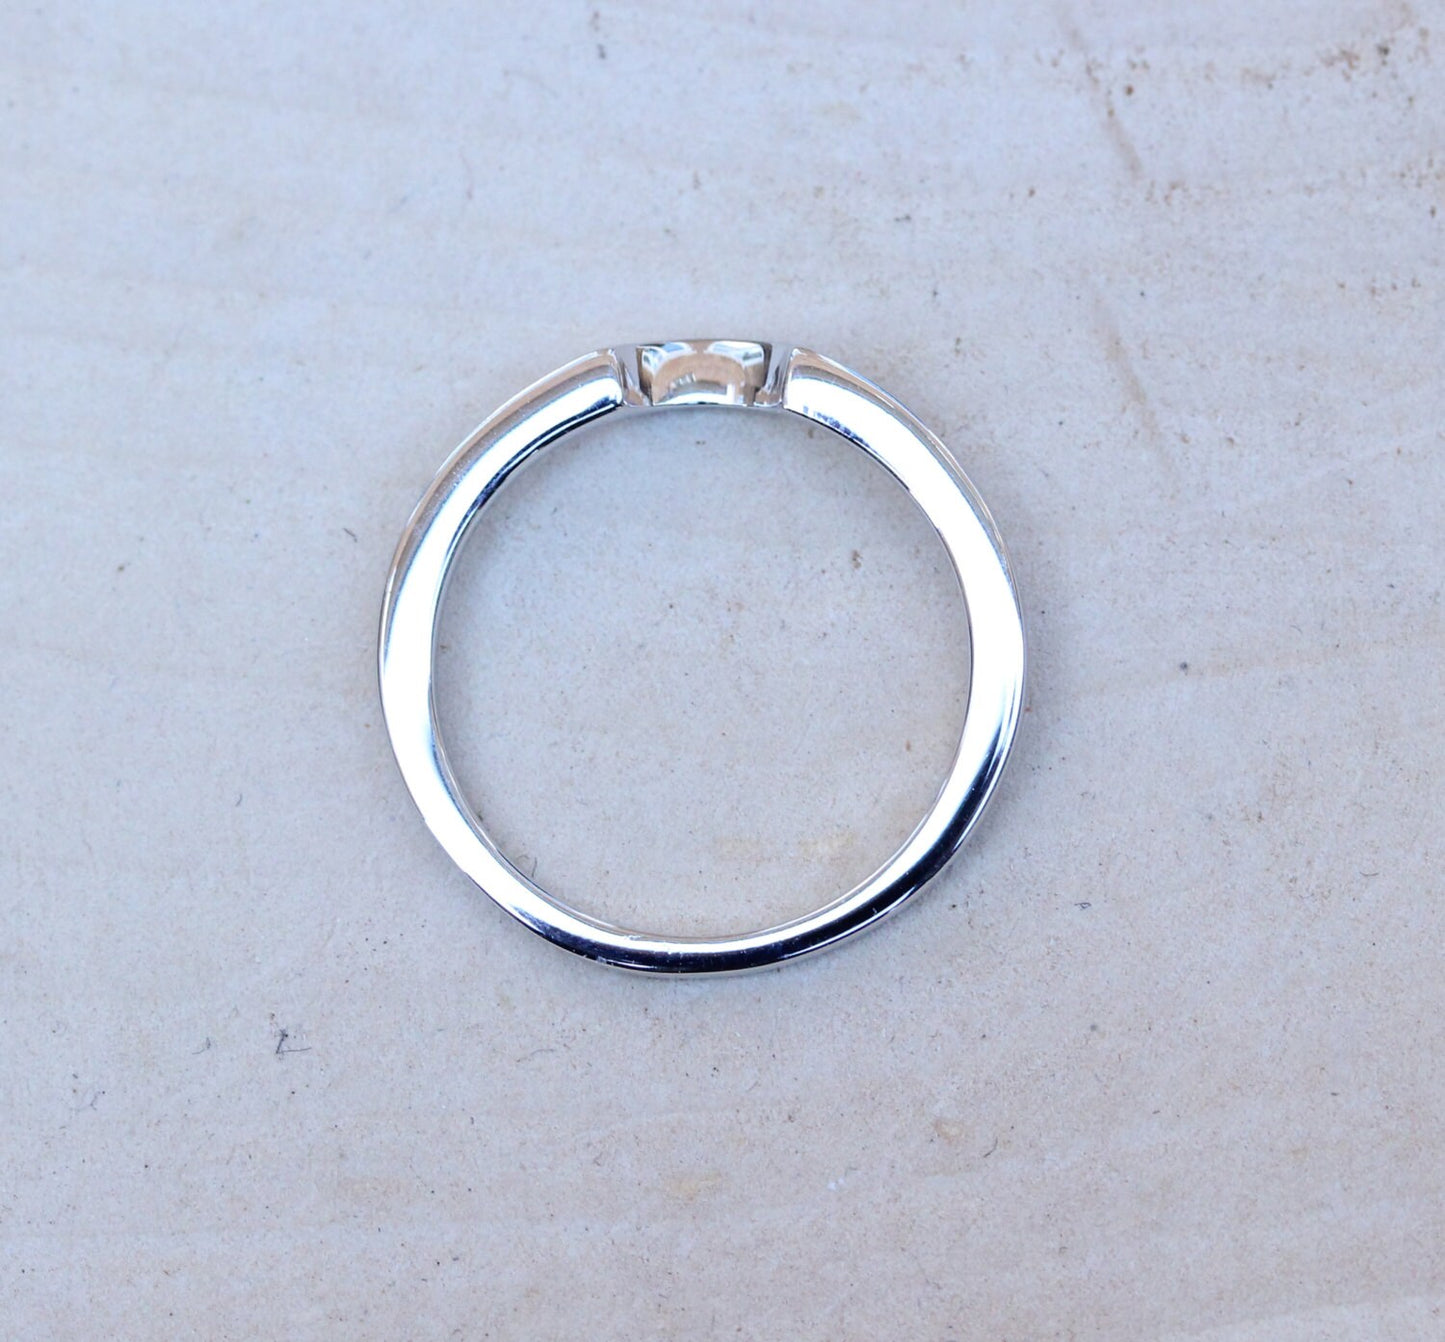 Curved wedding ring band - Available in Sterling Silver and White Gold Filled - Handmade